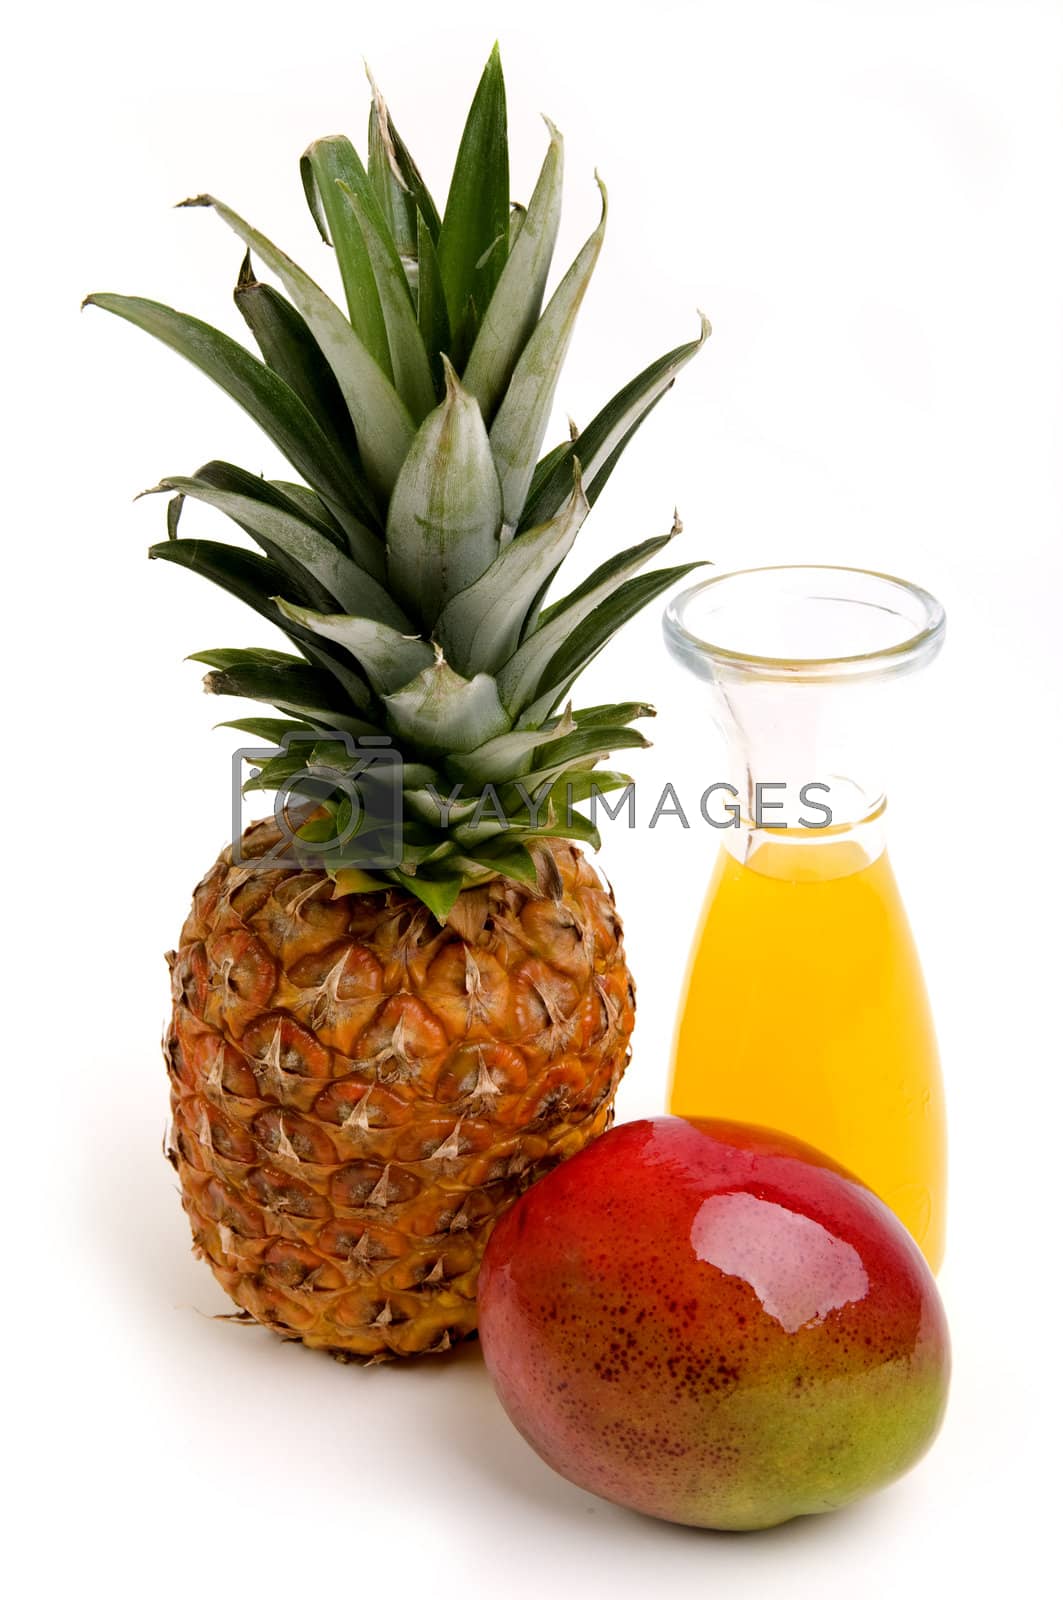 Royalty free image of Pinapple, mango and juice by aaron_stein